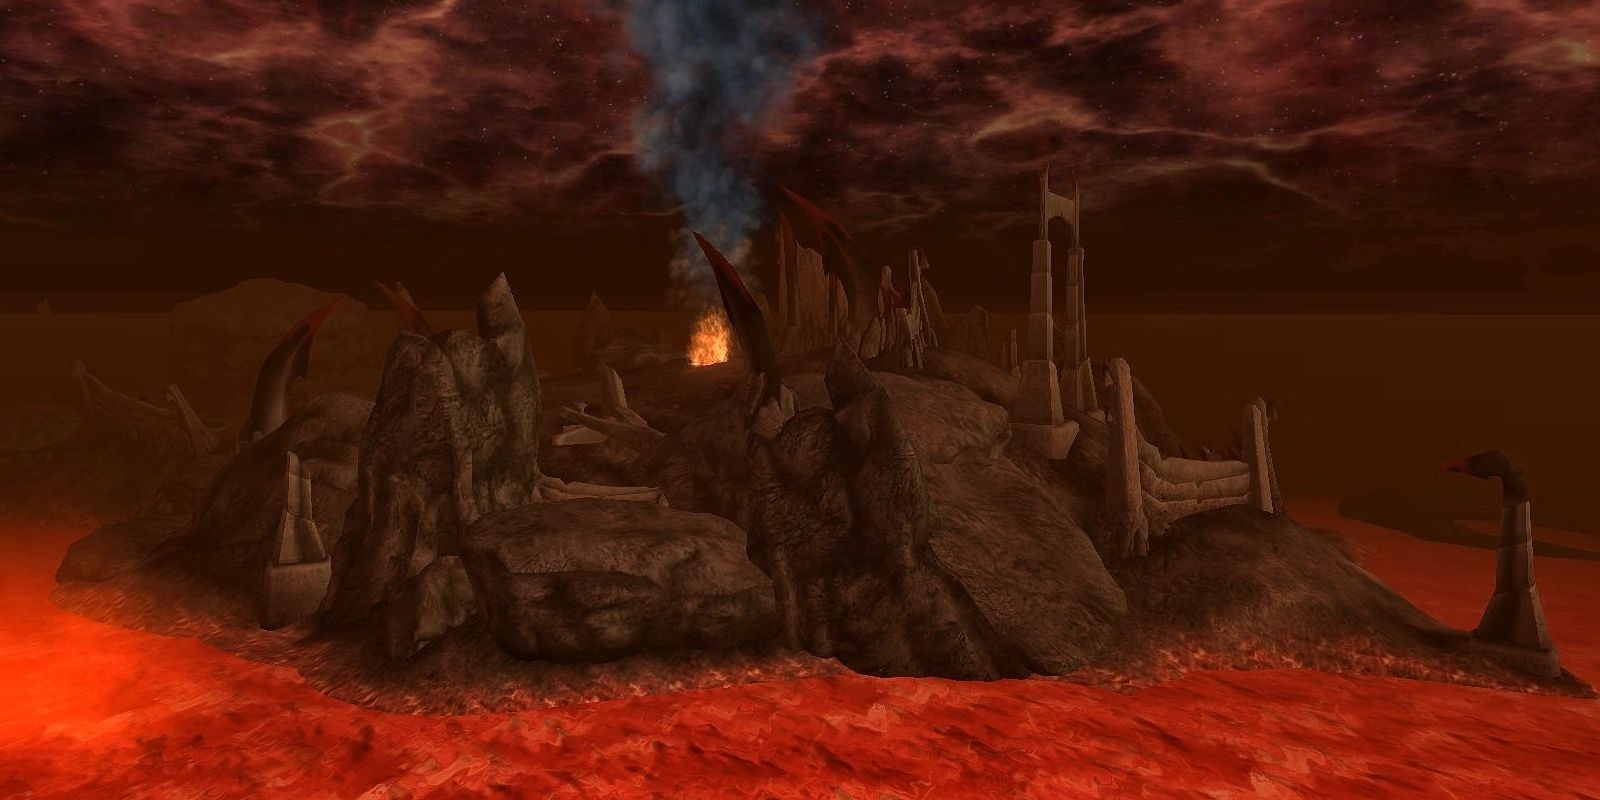 The Pits Oblivion Realm From The Elder Scrolls IV Oblivion